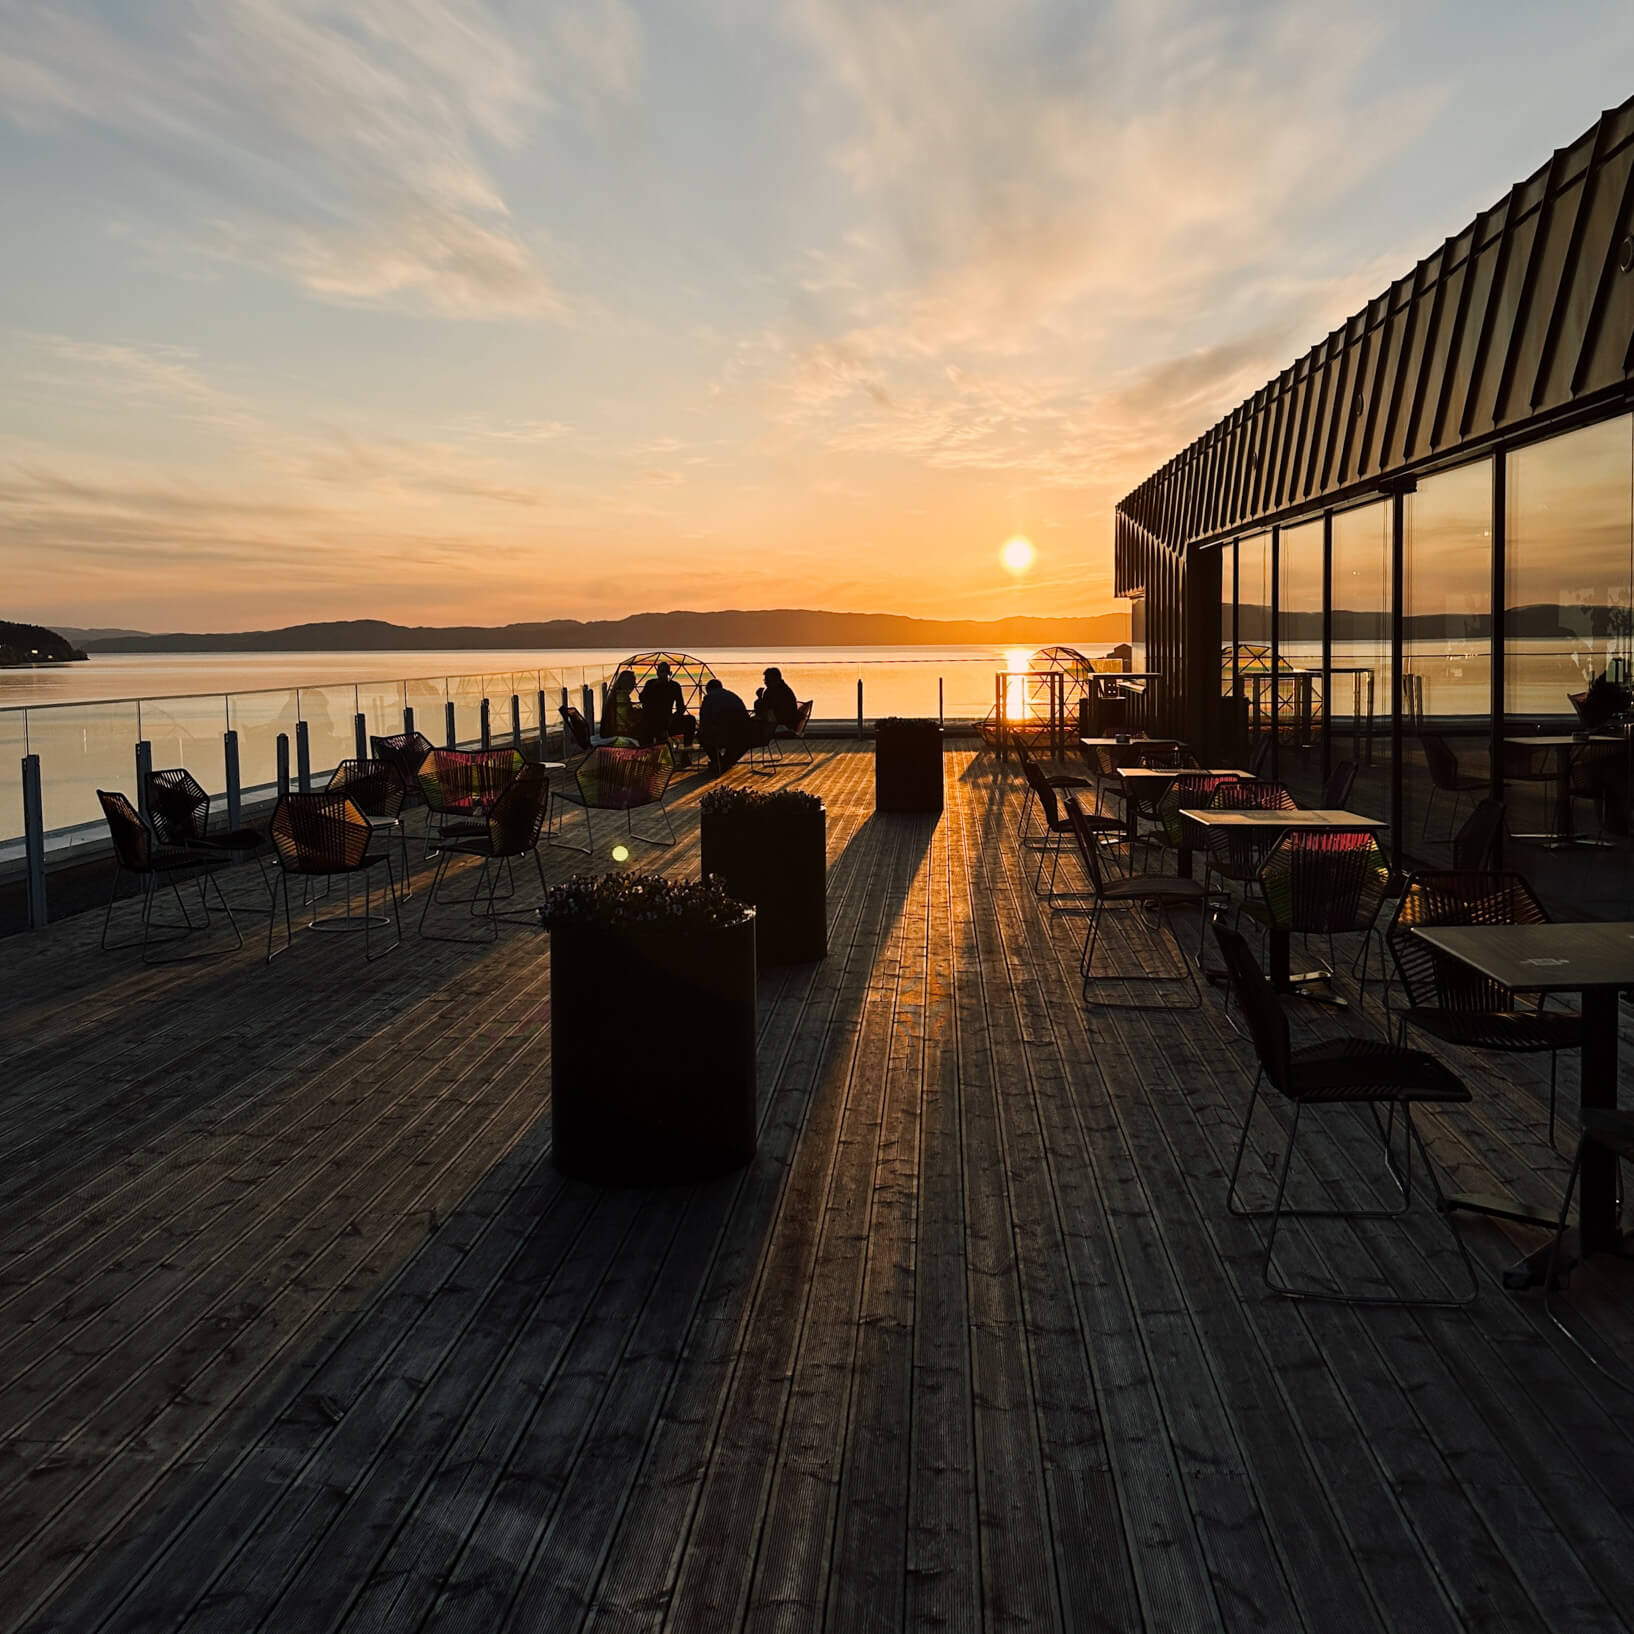 View and sunset at The Rooftop restaurant and bar at Clarion Hotel Trondheim. 